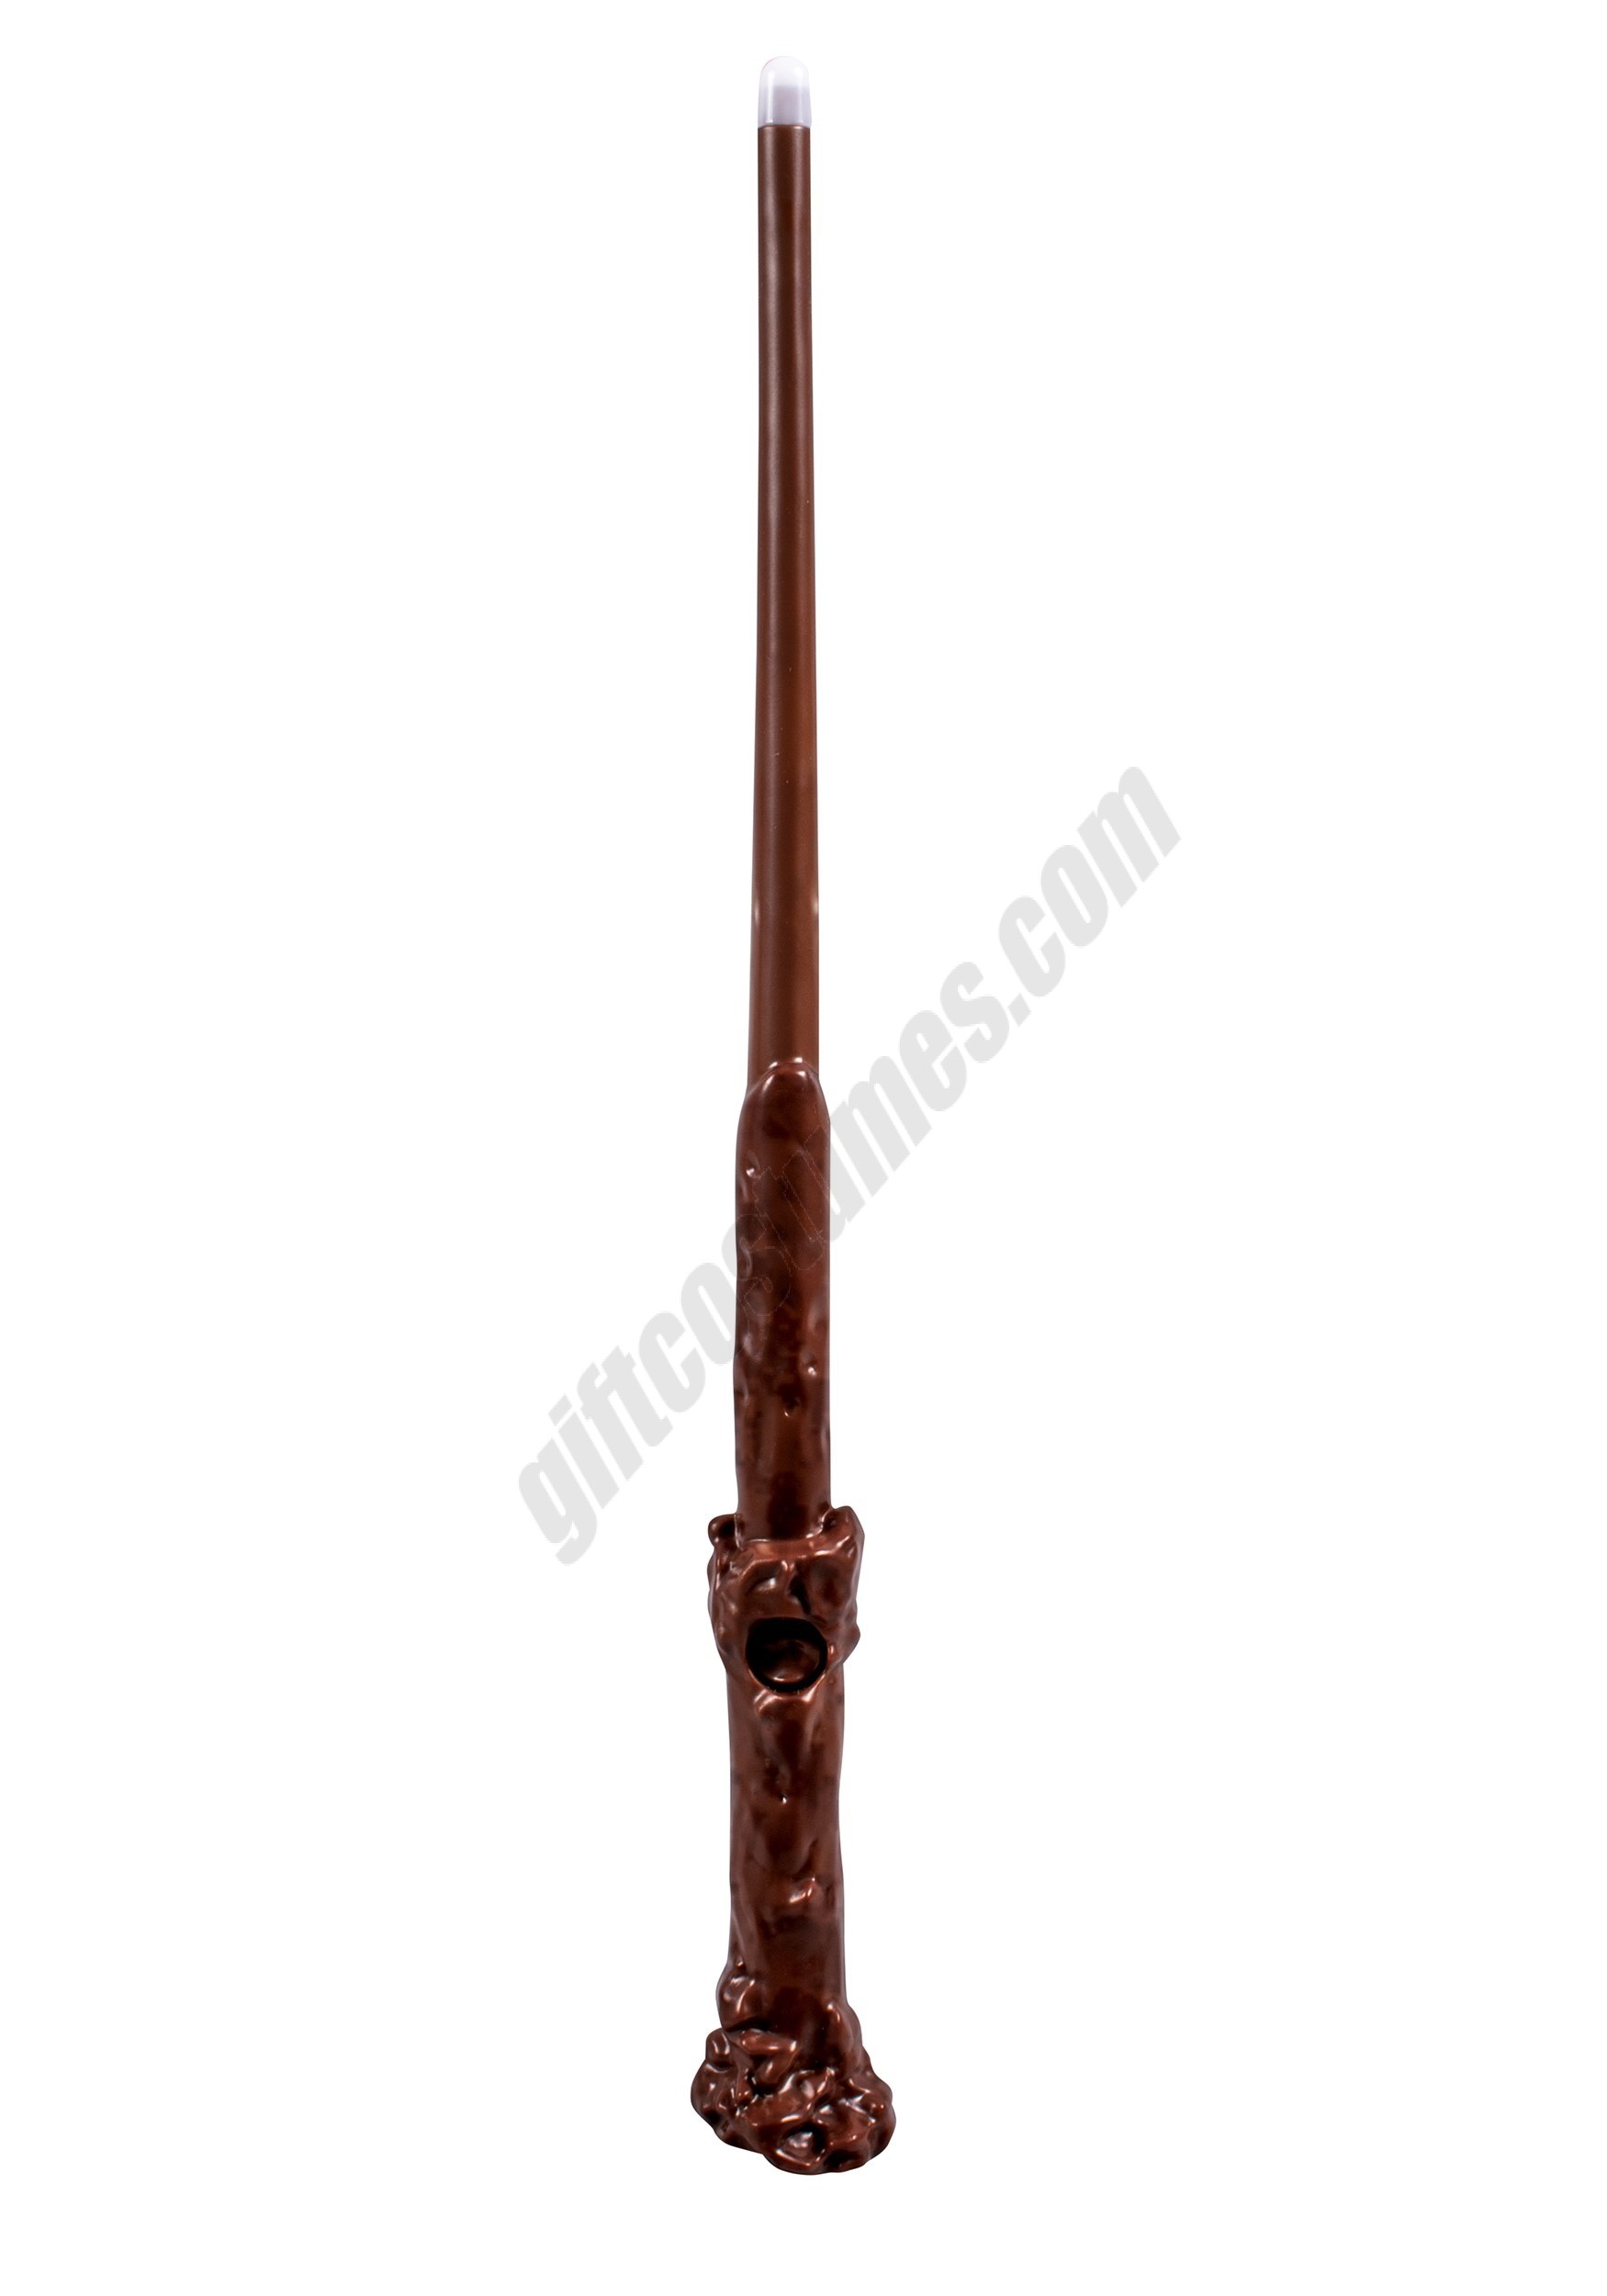 Harry Potter Deluxe Light Up Harry Wand Promotions - Harry Potter Deluxe Light Up Harry Wand Promotions